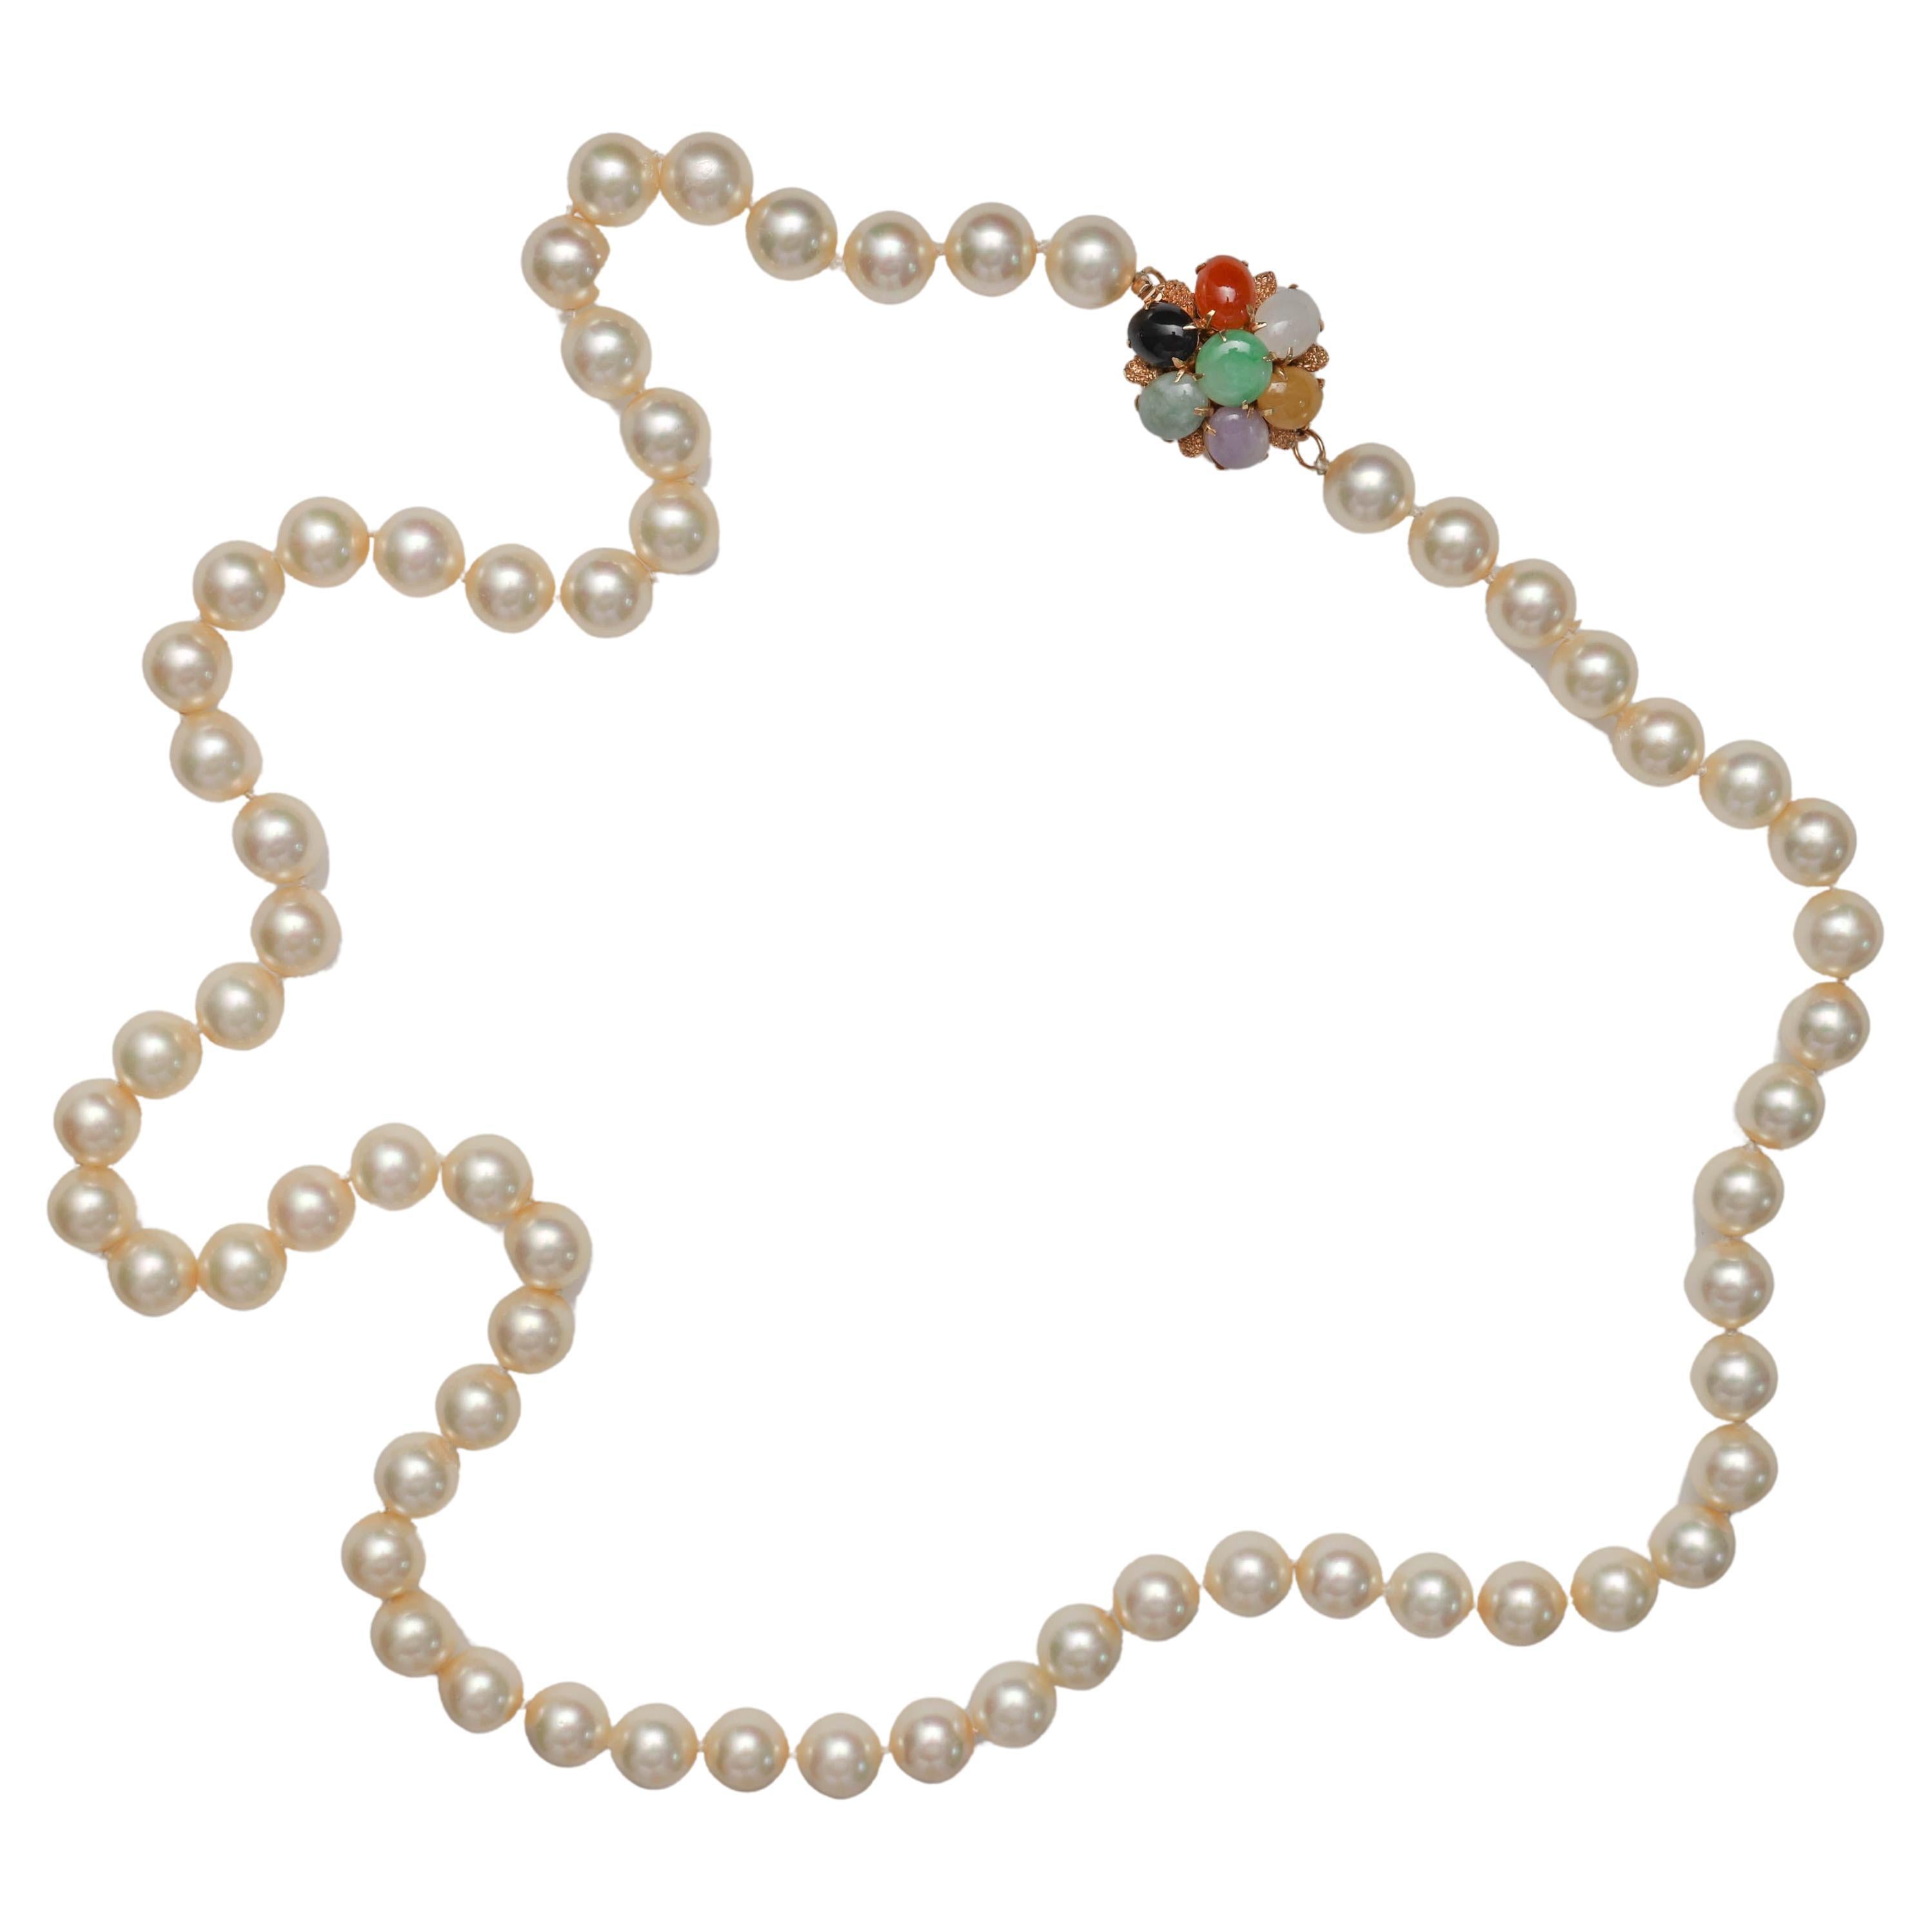 Midcentury Pearl Necklace with Jade Clasp Luxury Cultured Akoya Pearls